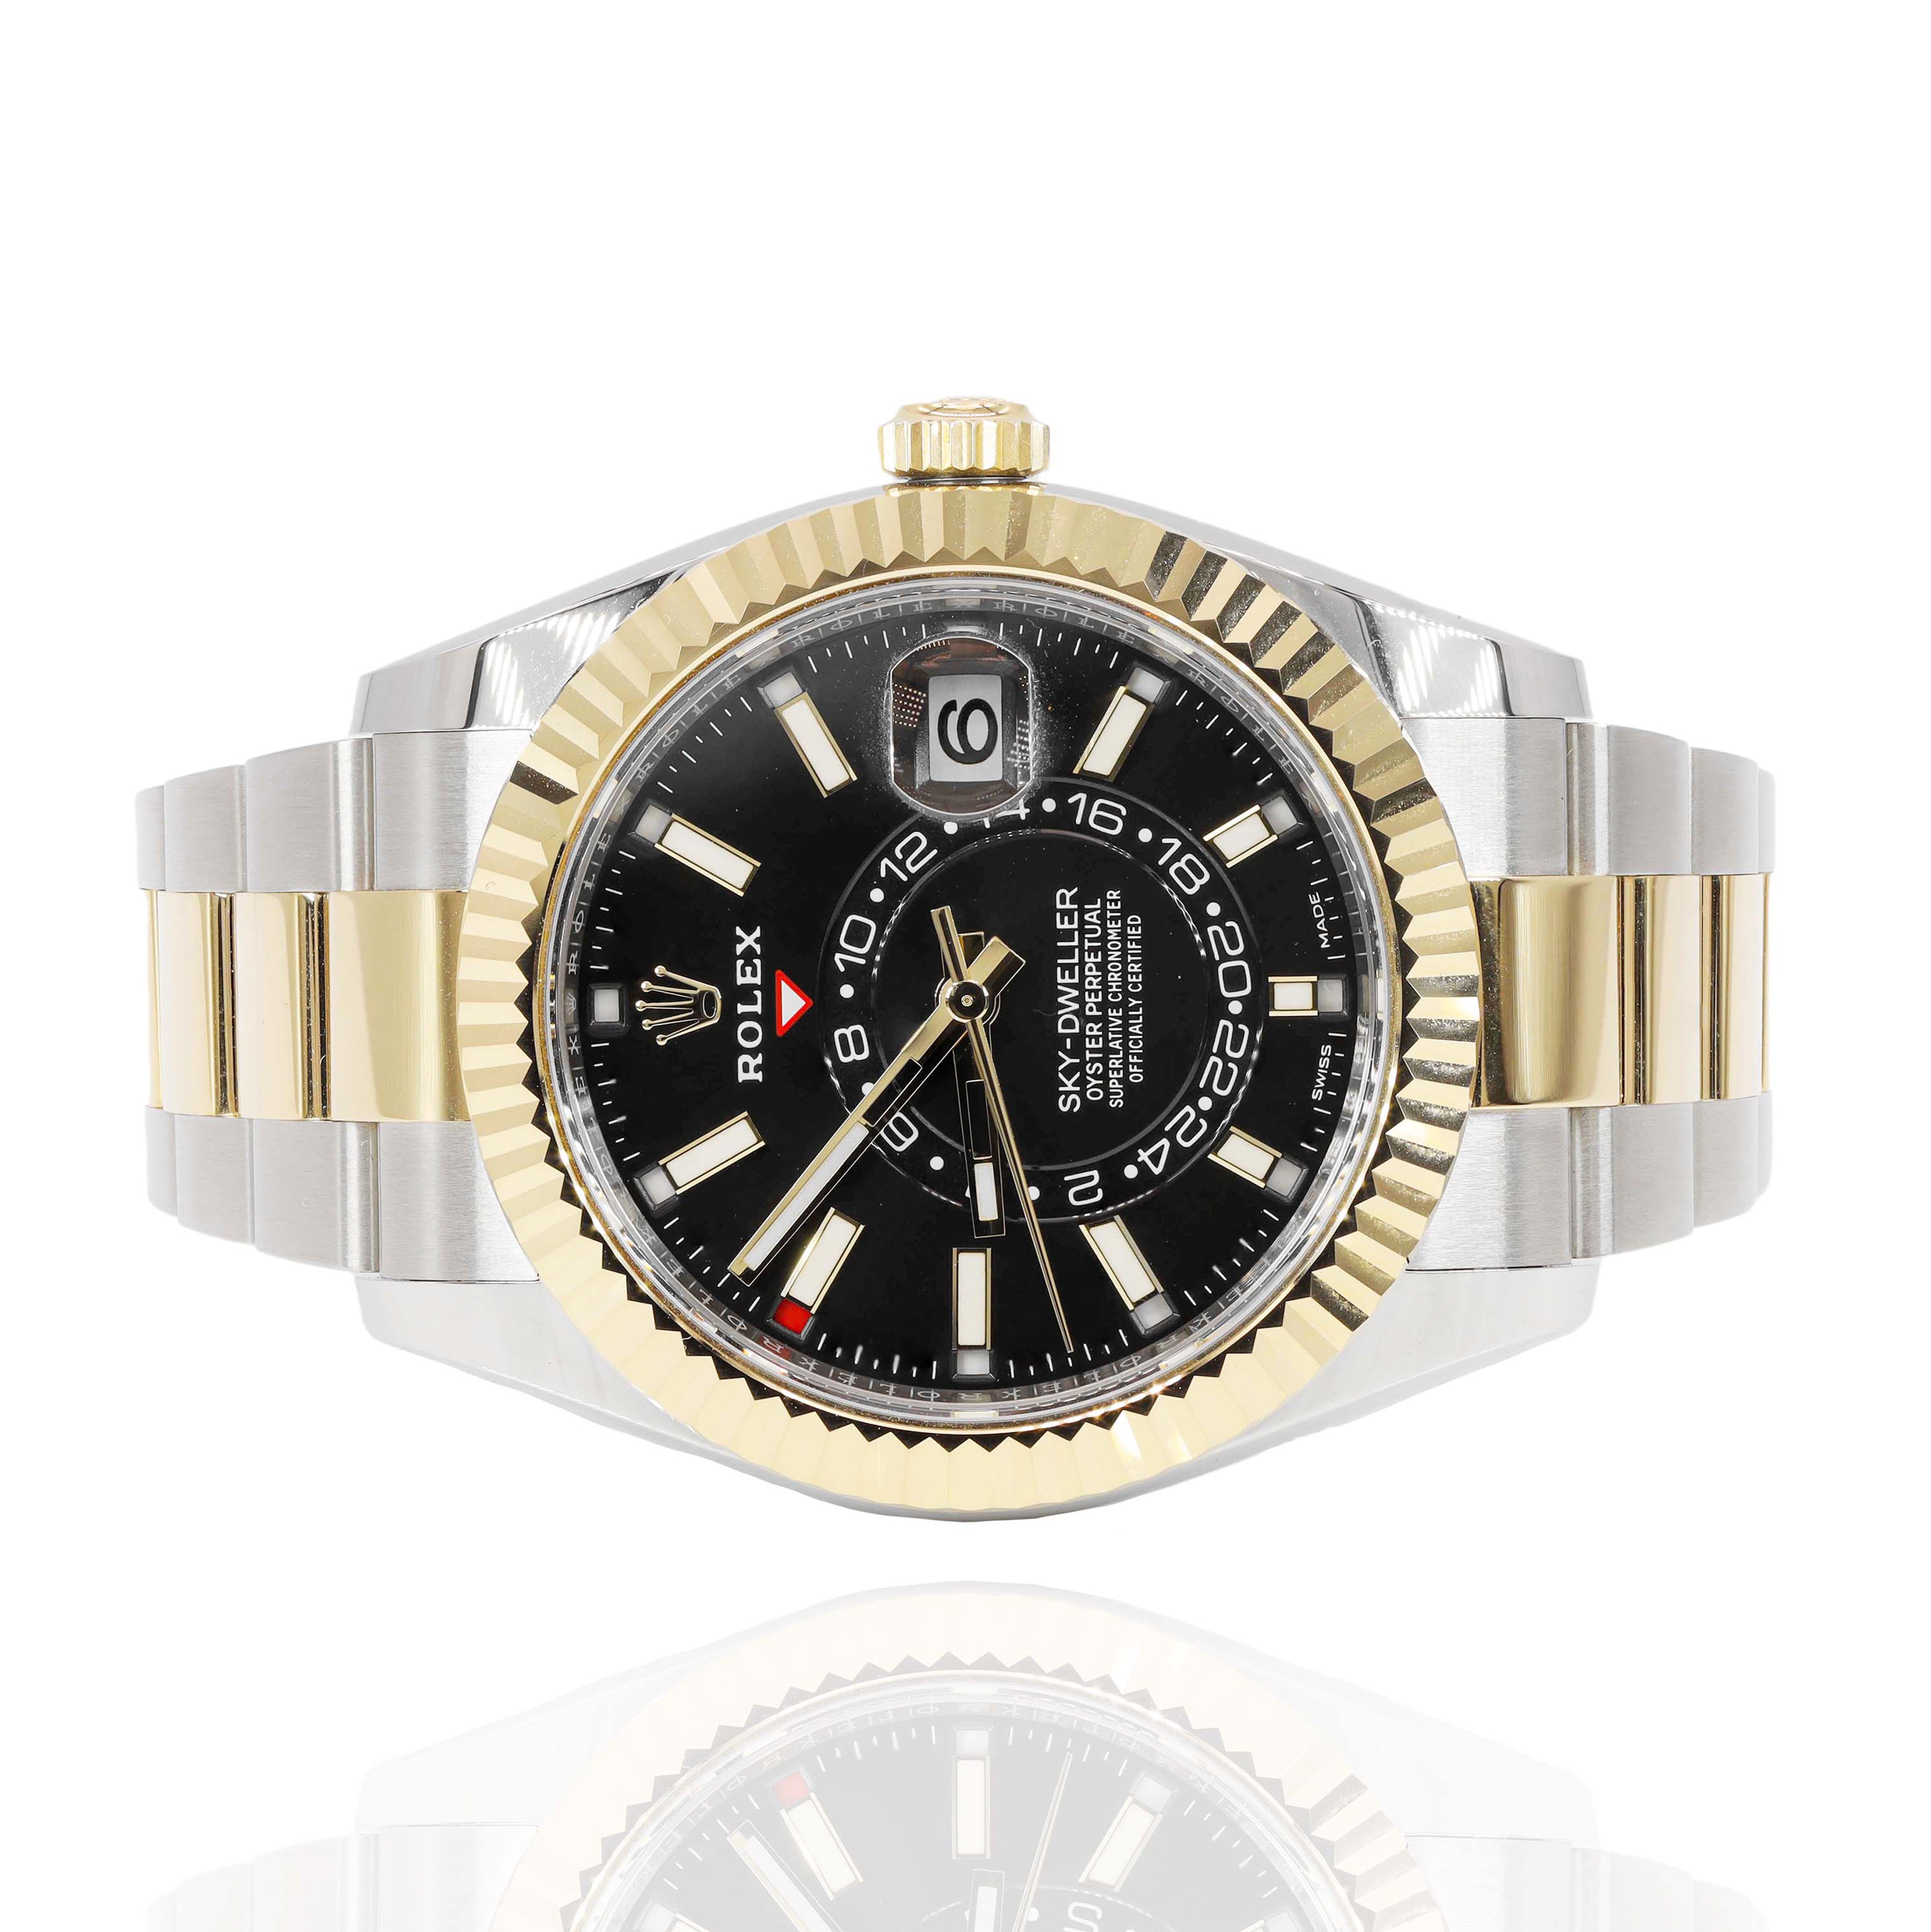 Rolex 326933 Sky Dweller Black Dial 18k Yellow Gold Stainless Steel